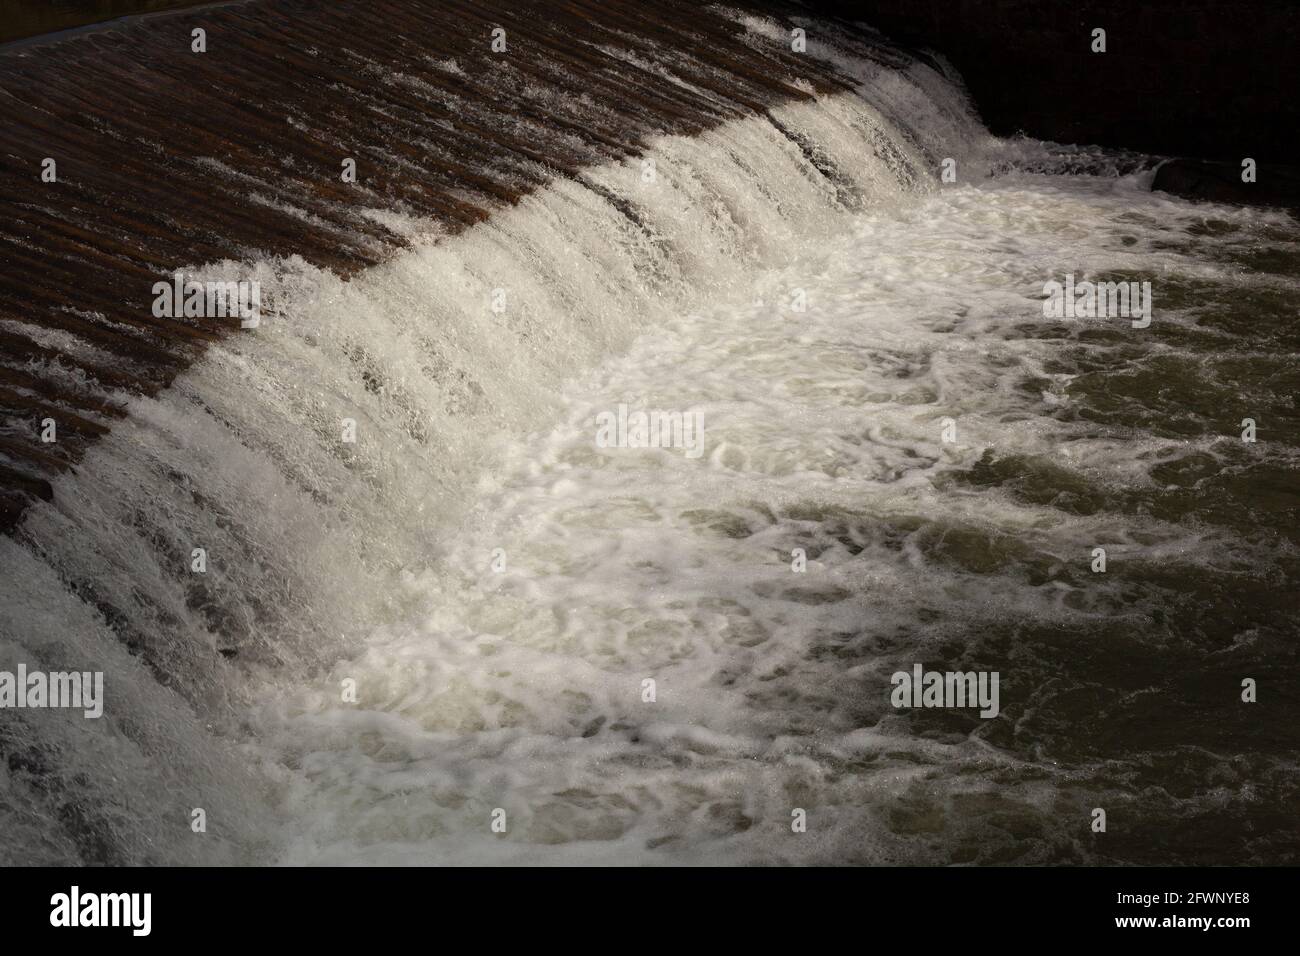 A spillway with white water, close-up of the center of the fall and the bubbling water. Stock Photo